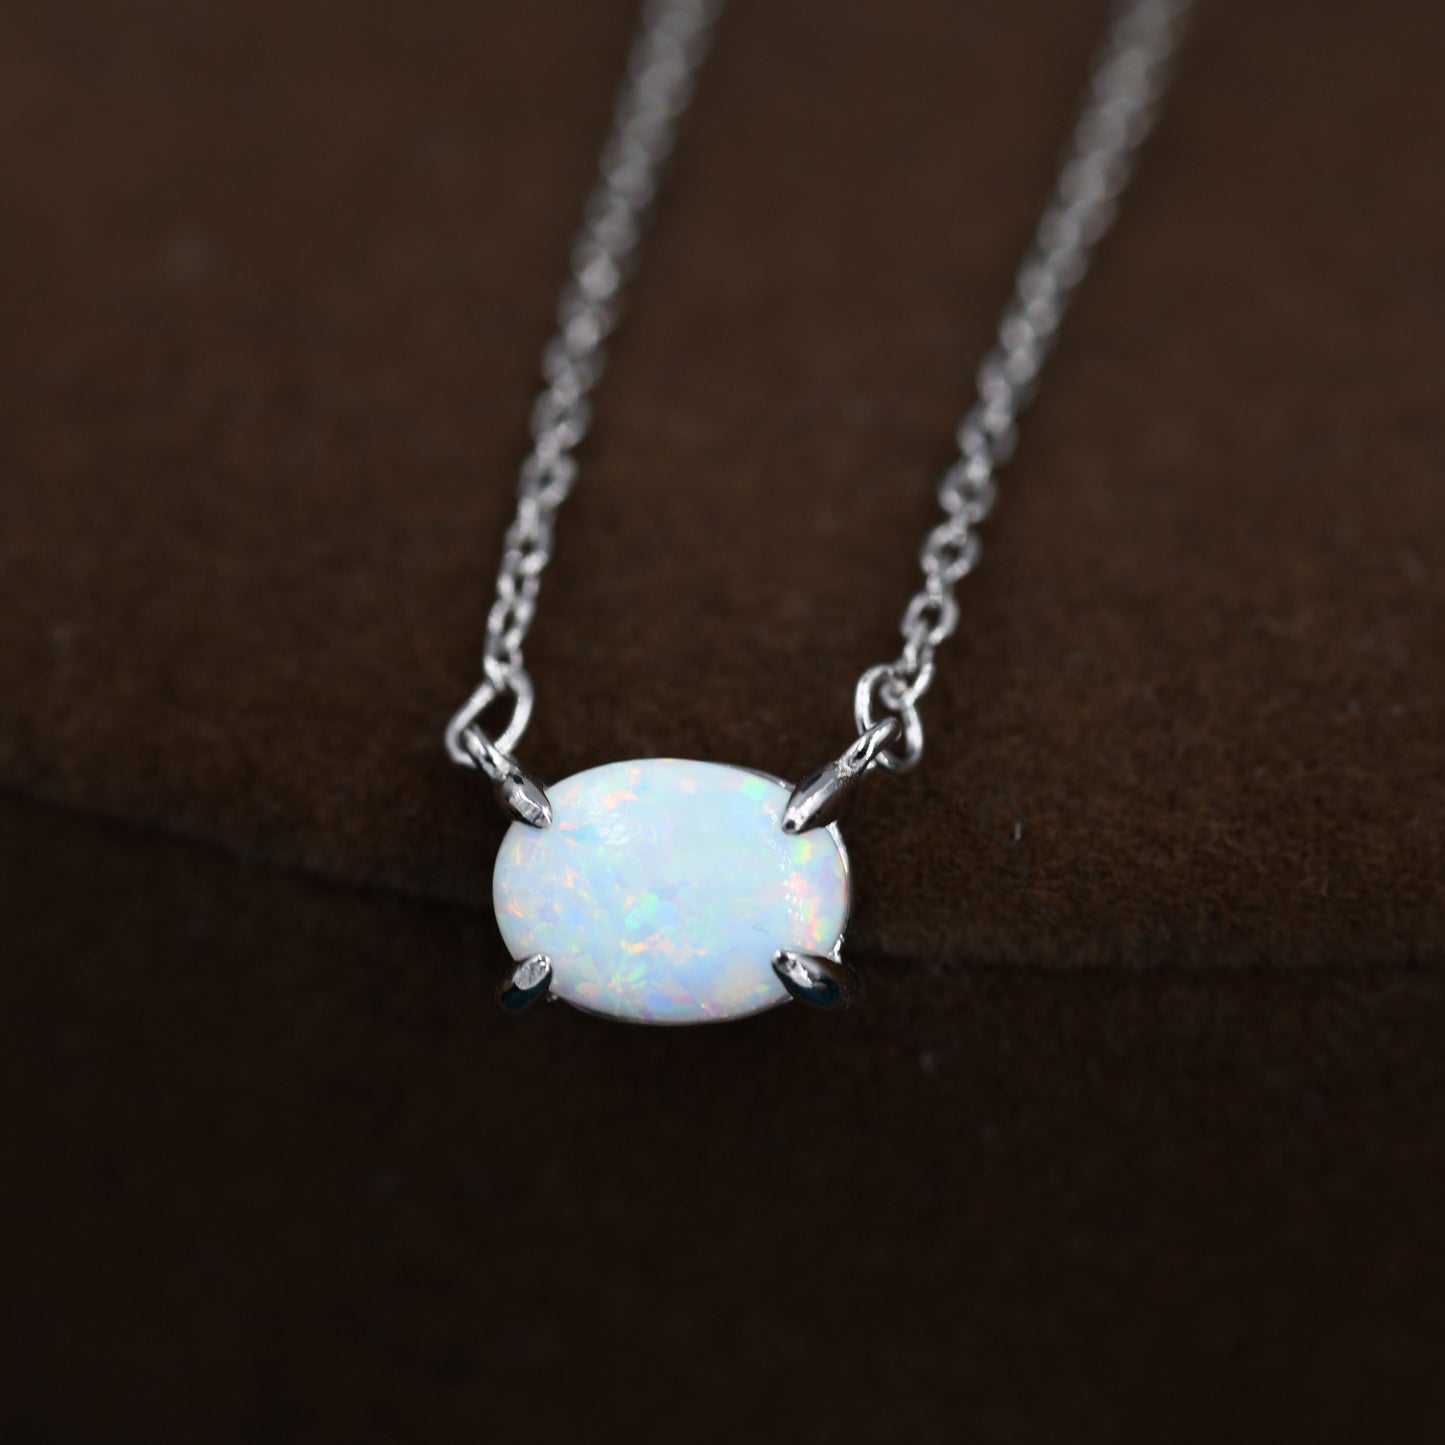 White Opal Oval Necklace in Sterling Silver, Dainty Lab Oval Cabochon Necklace, October Birthstone